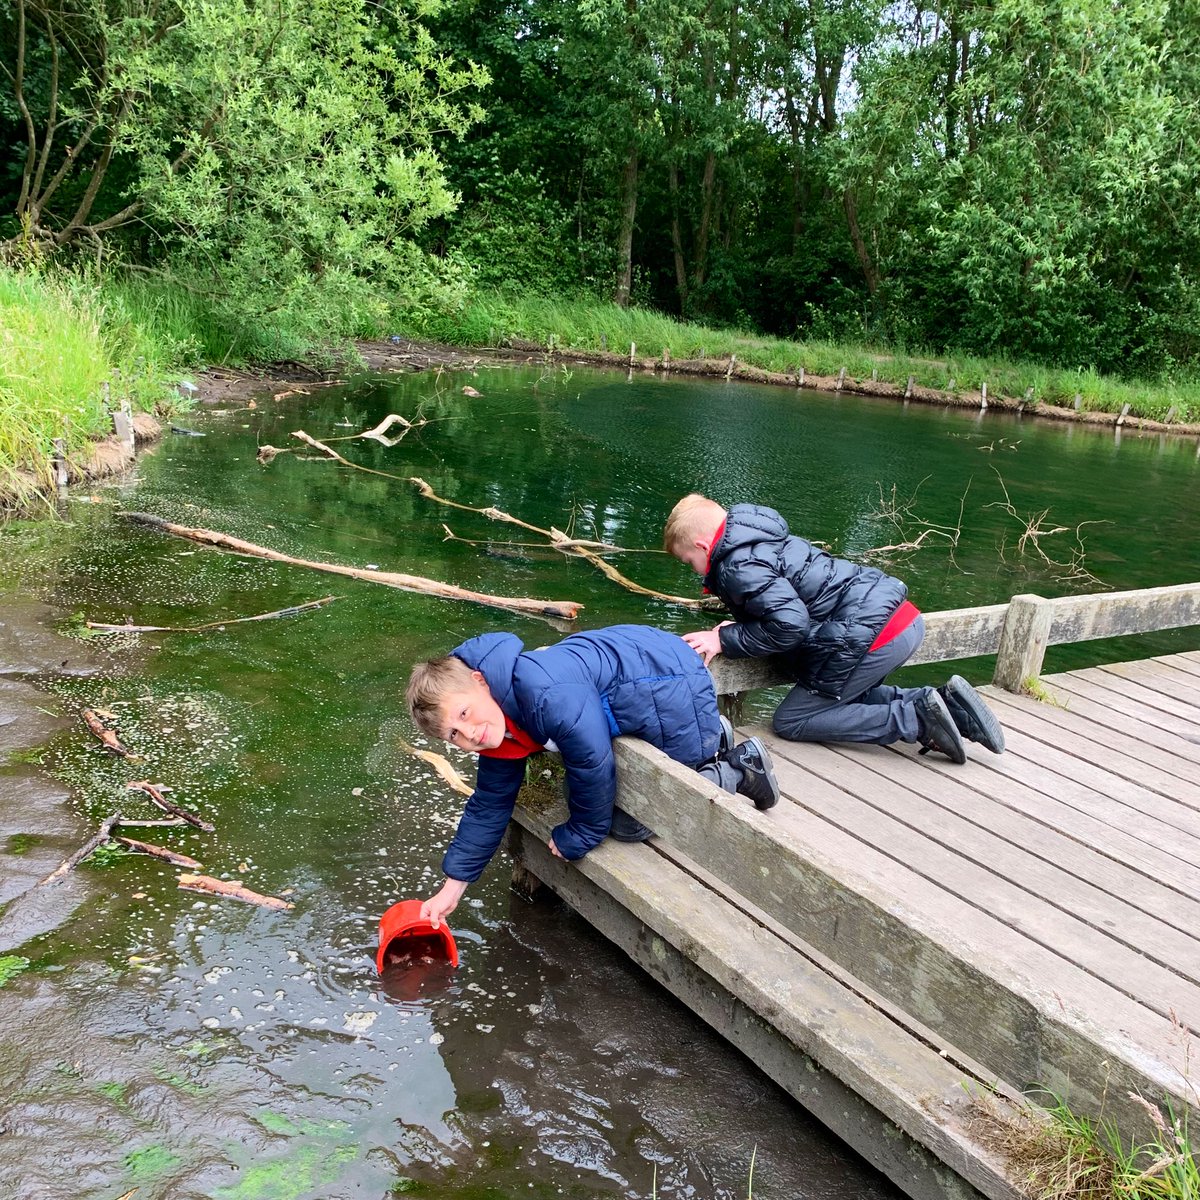 Kaiden and Branden enjoyed exploring the depths of a local pond in the hunt for more #LostWords 🐸